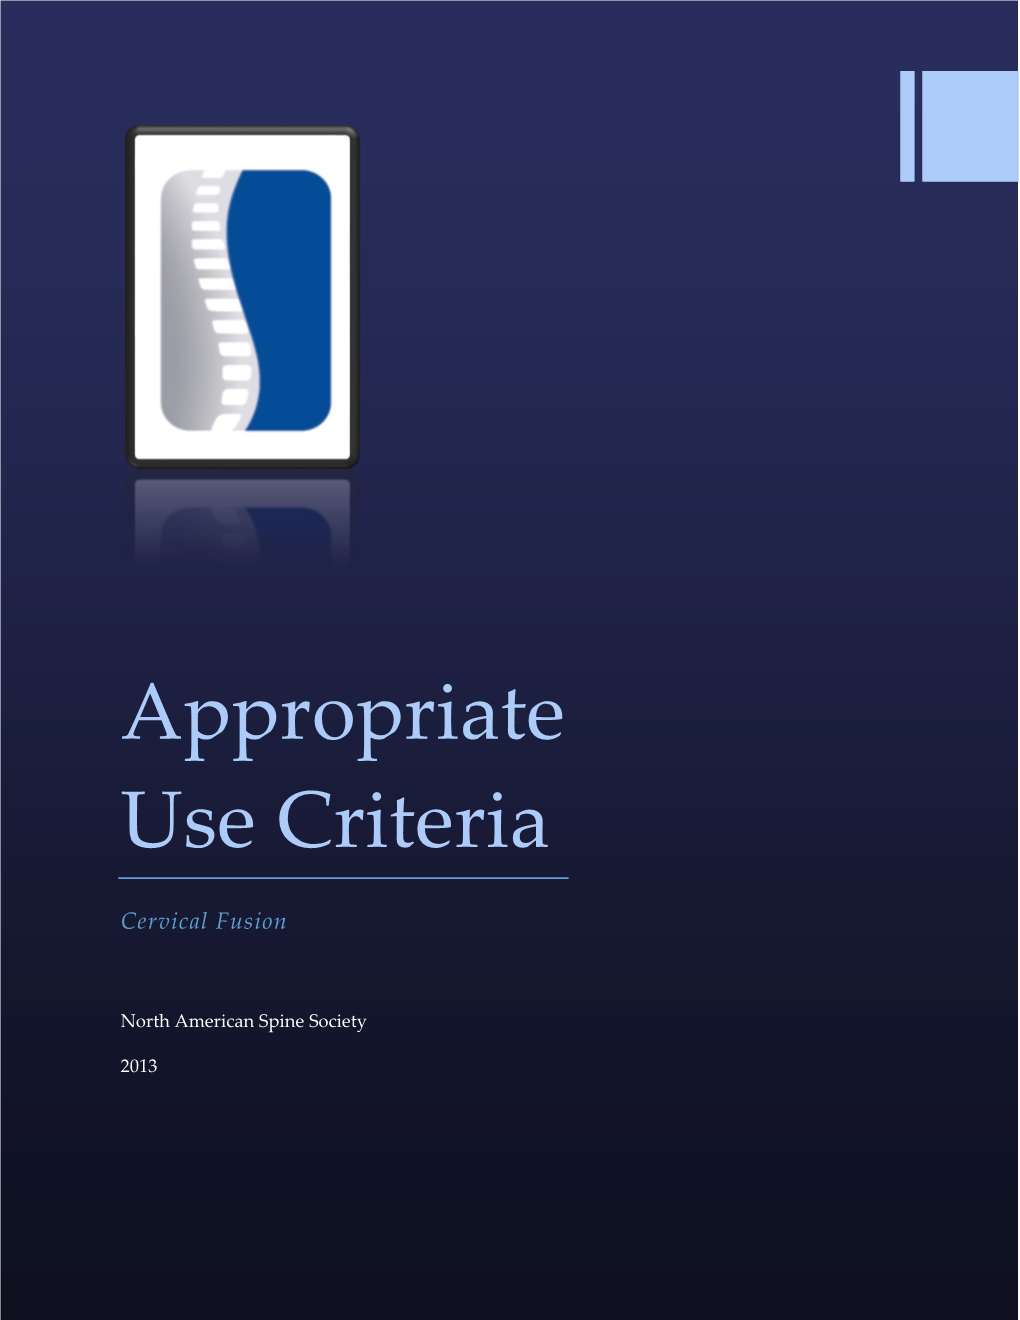 Cervical Fusion Appropriate Use Criteria Work Groups